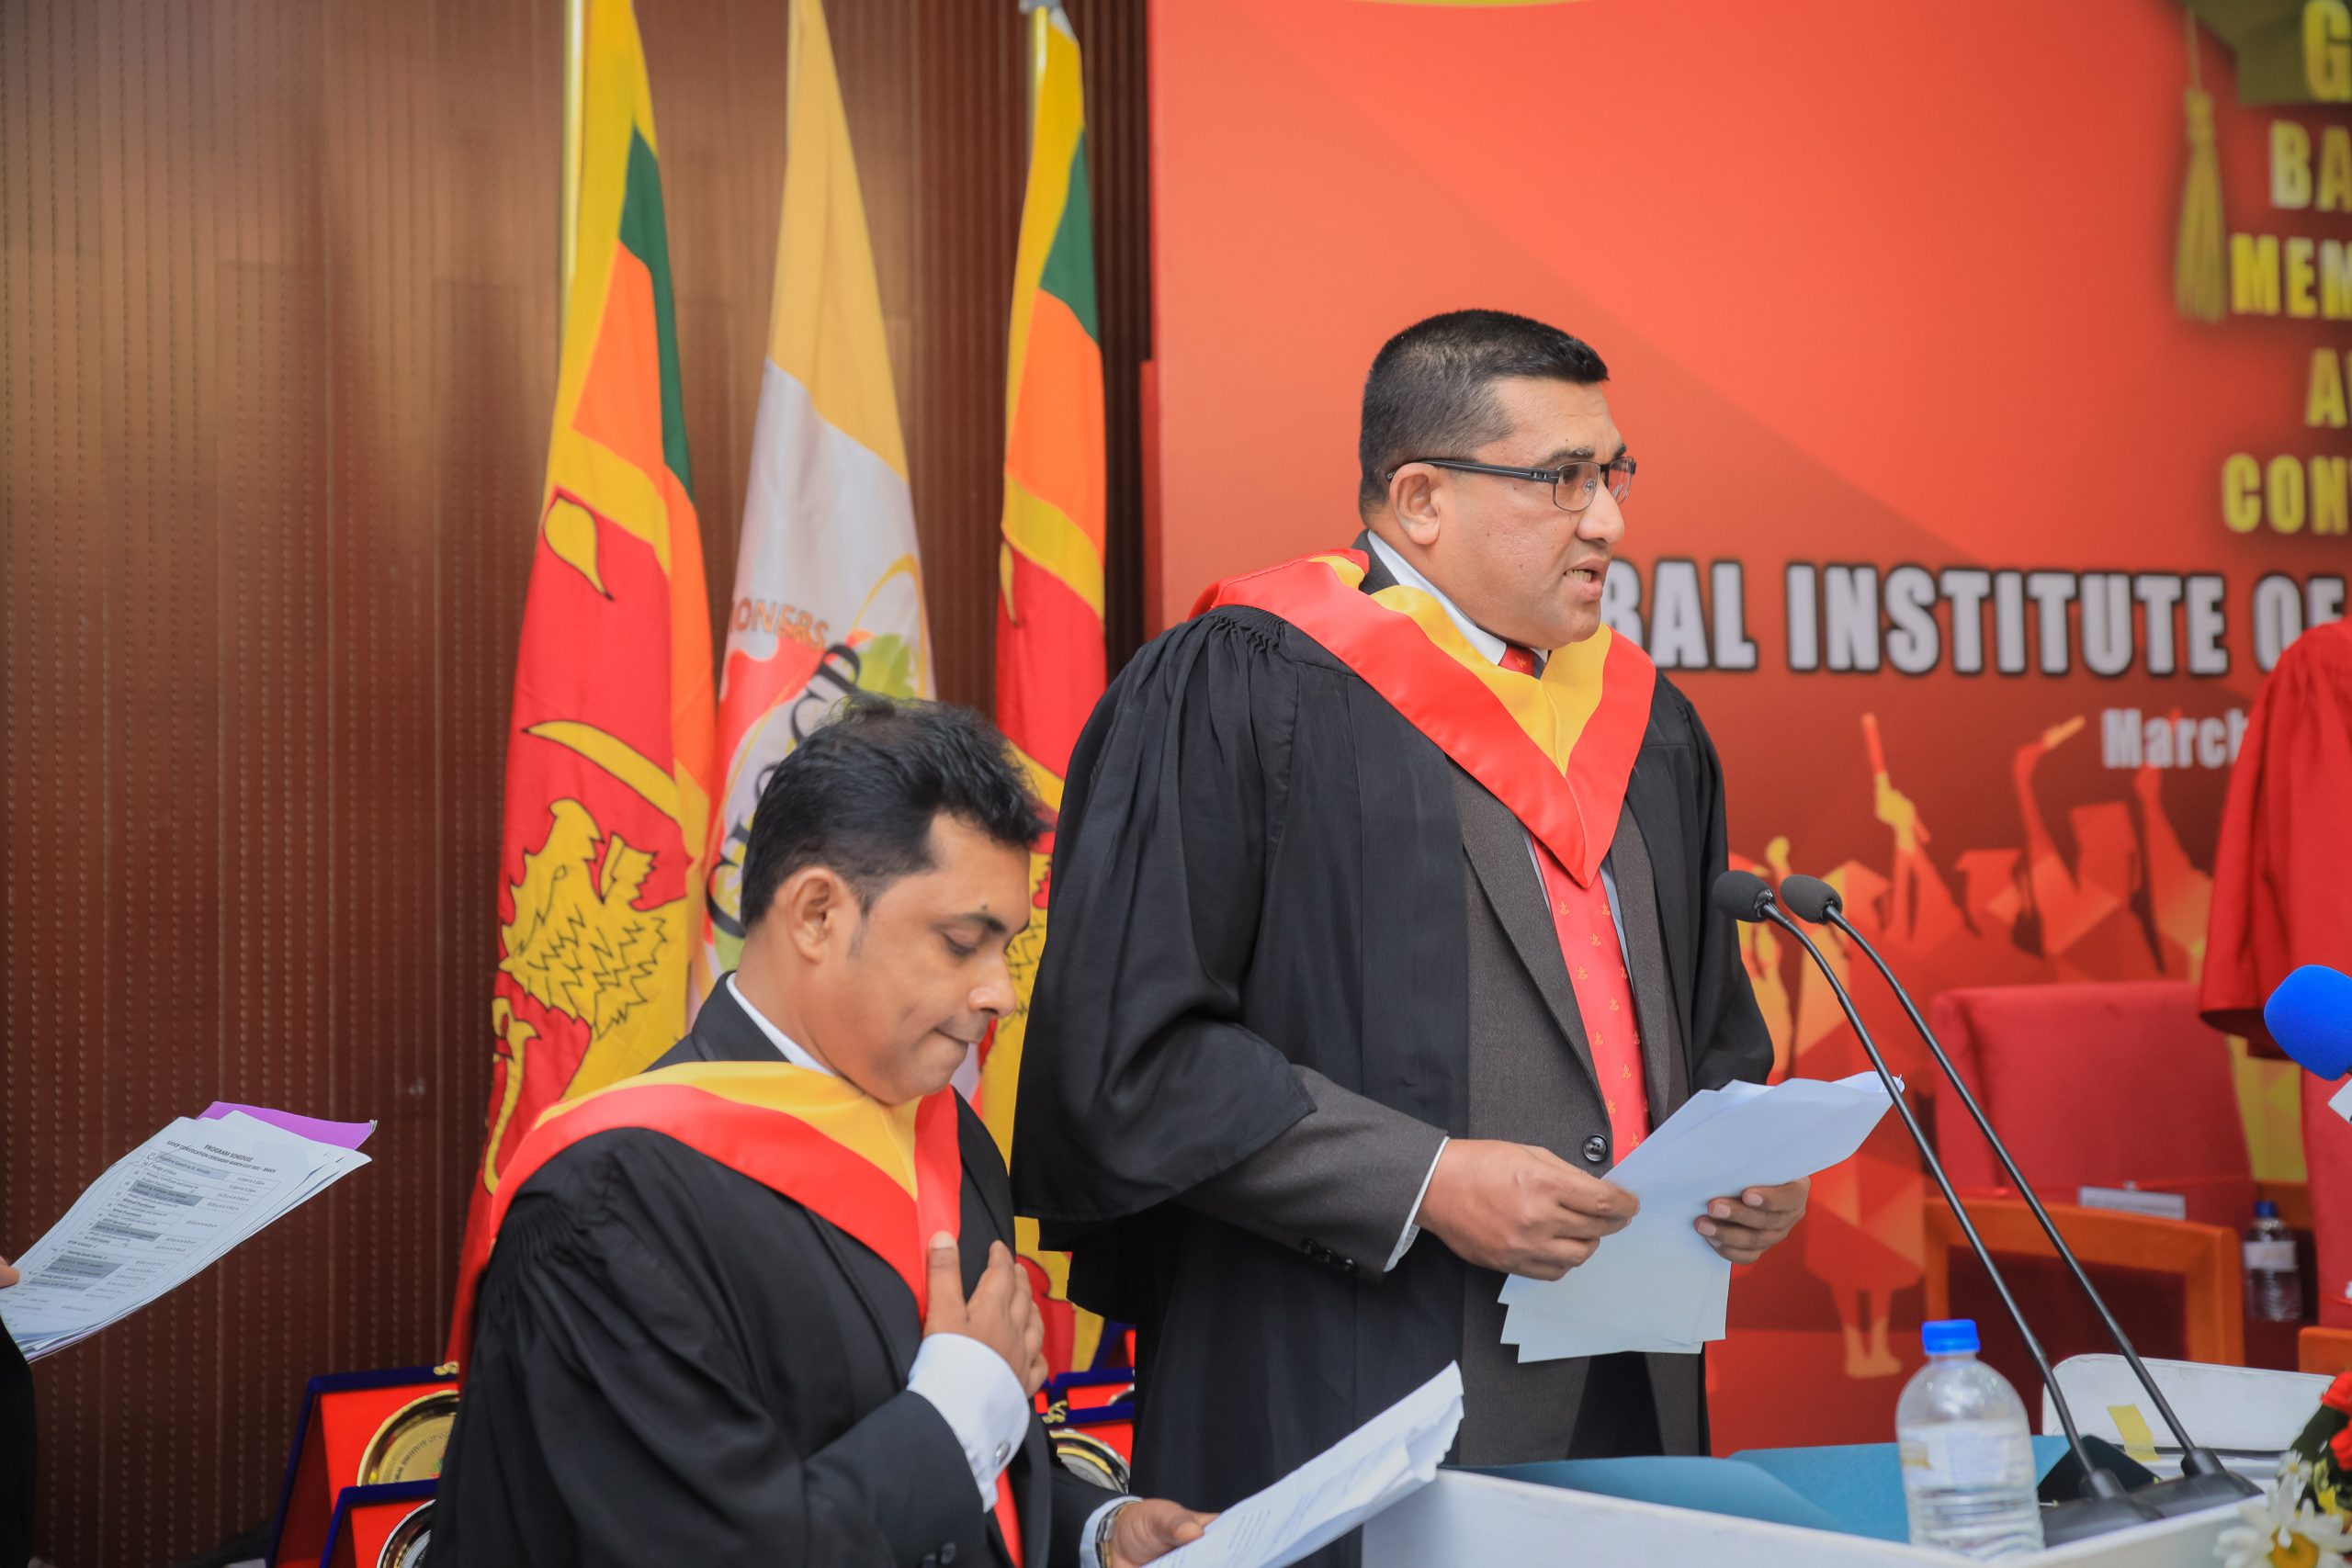 Global institute of counseling professionals